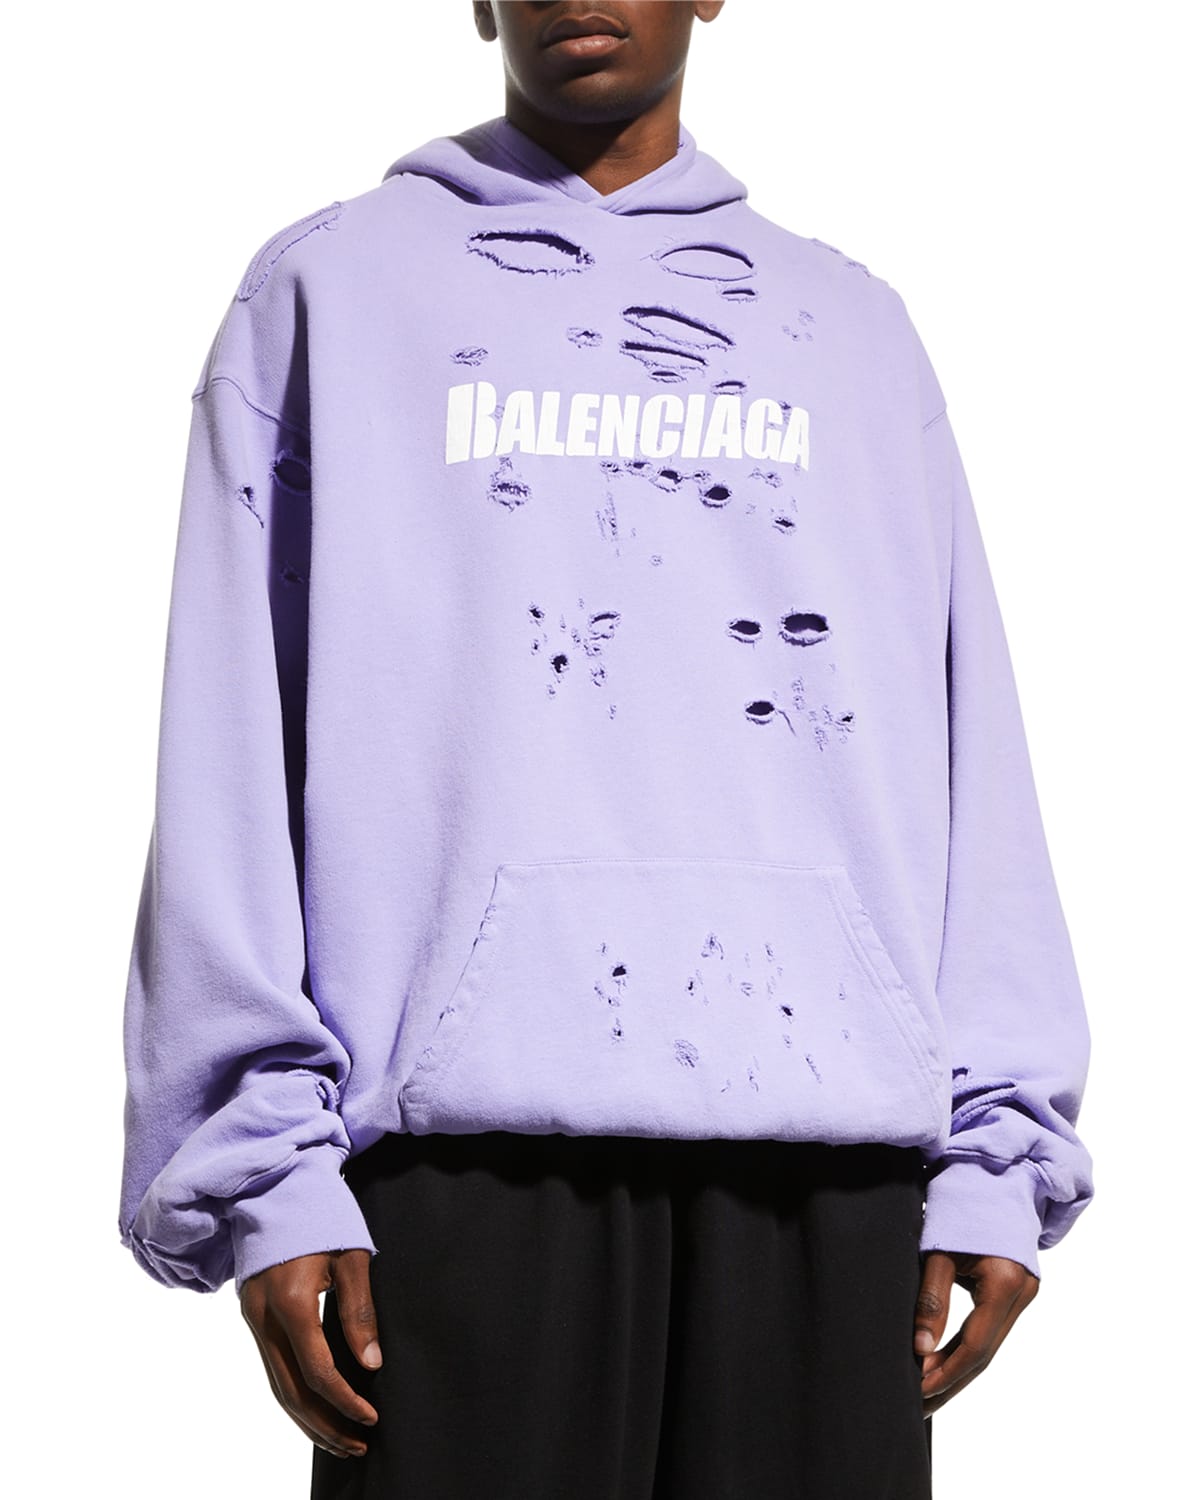 This DESTROYED Balenciaga hoodie SCARES ME! Distressed Campaign